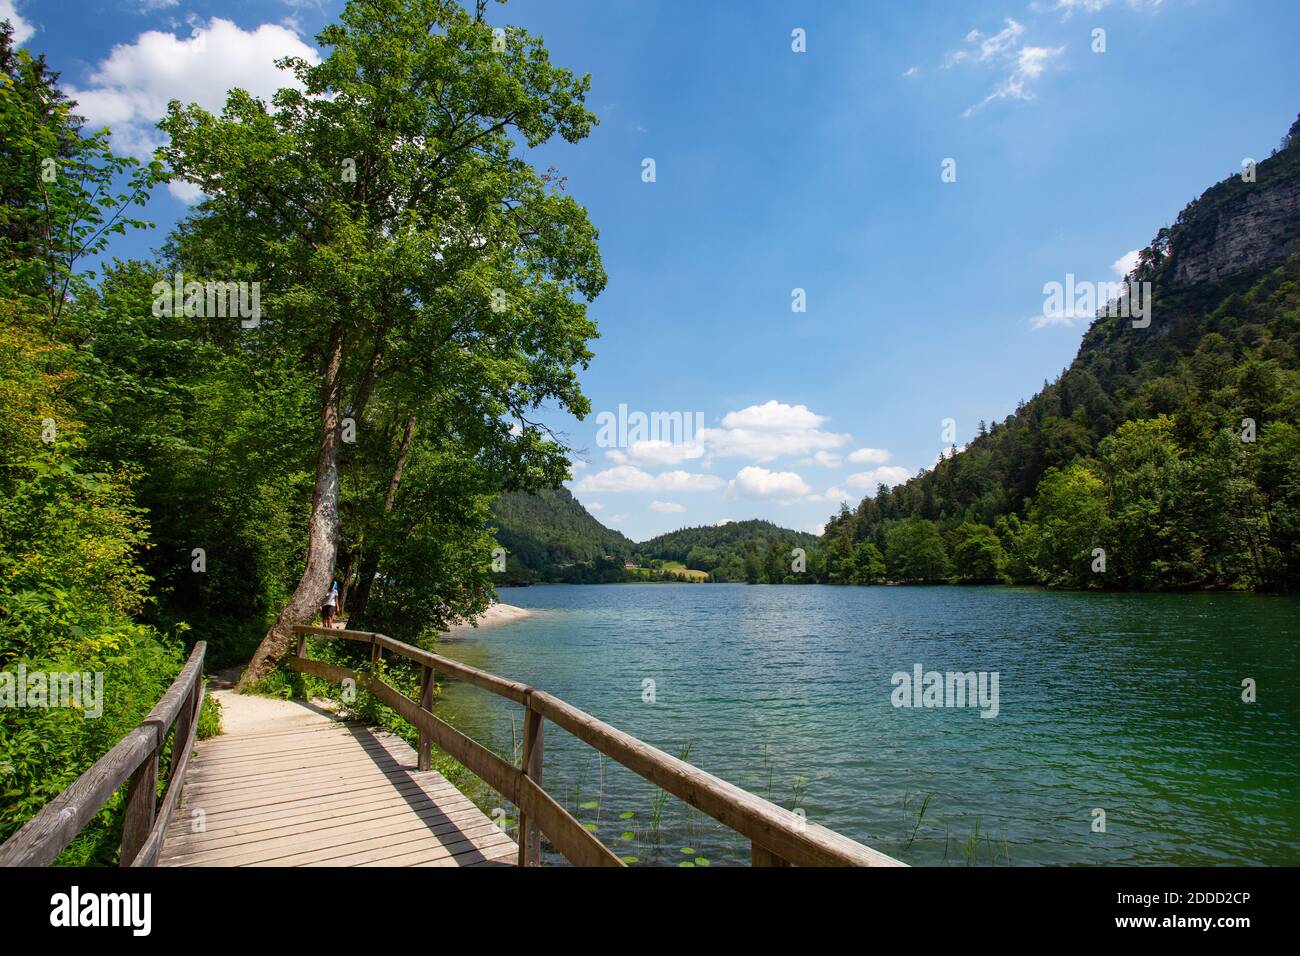 Germany, Bavaria, Bad Reichenhall, Small wooden bridge on shore of Thumsee lake in summer Stock Photo